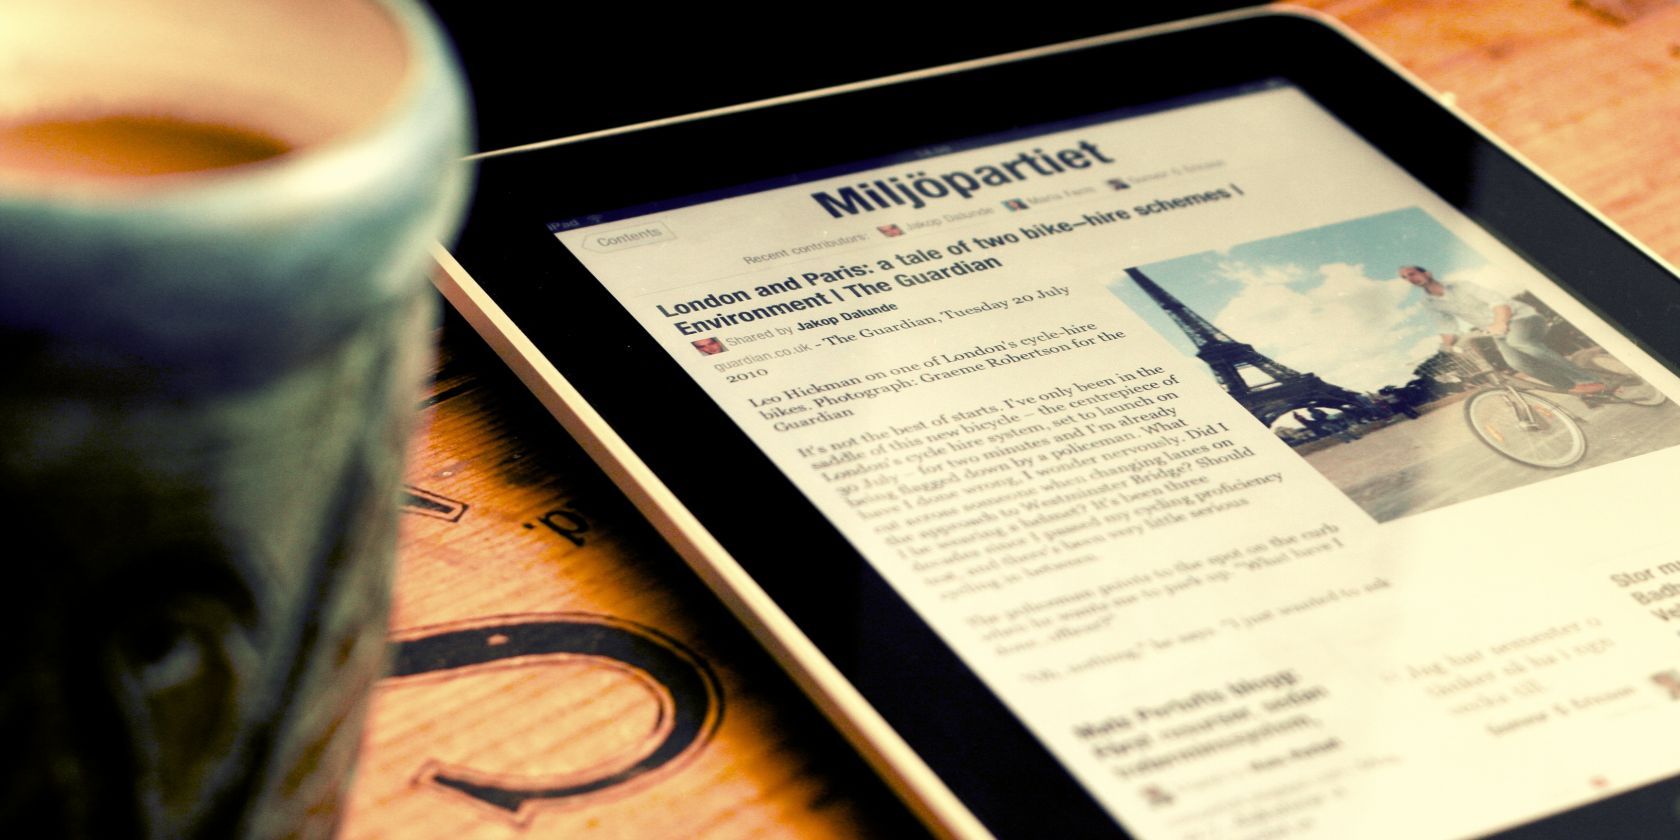 10 Great Places to Find Articles Worth Reading on the Web